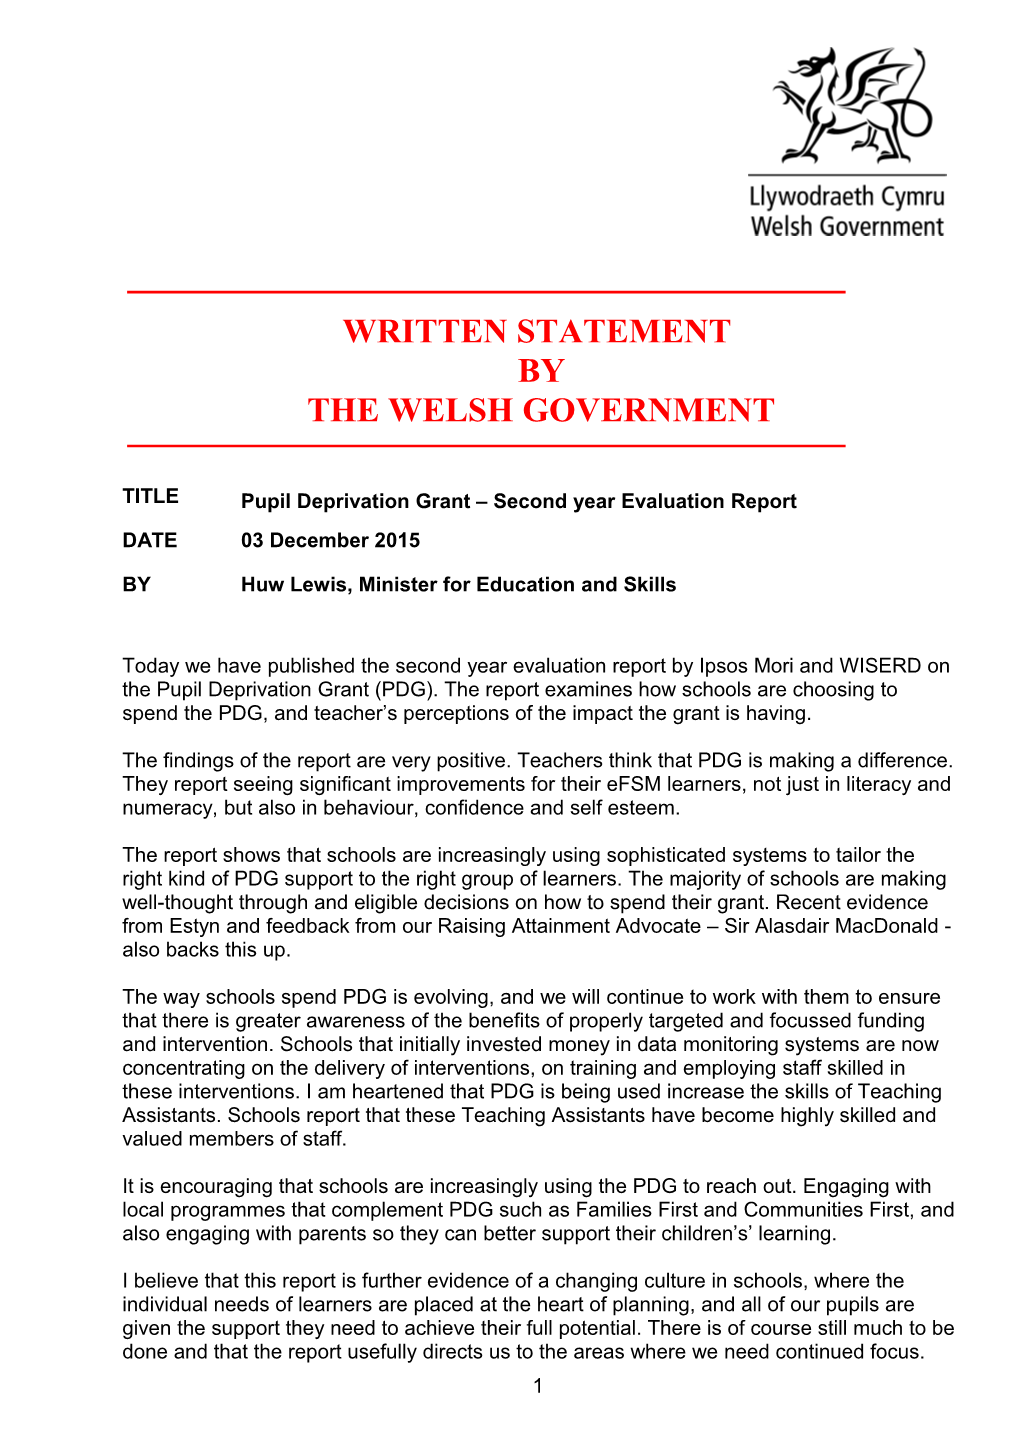 Pupil Deprivation Grant Second Year Evaluation Report